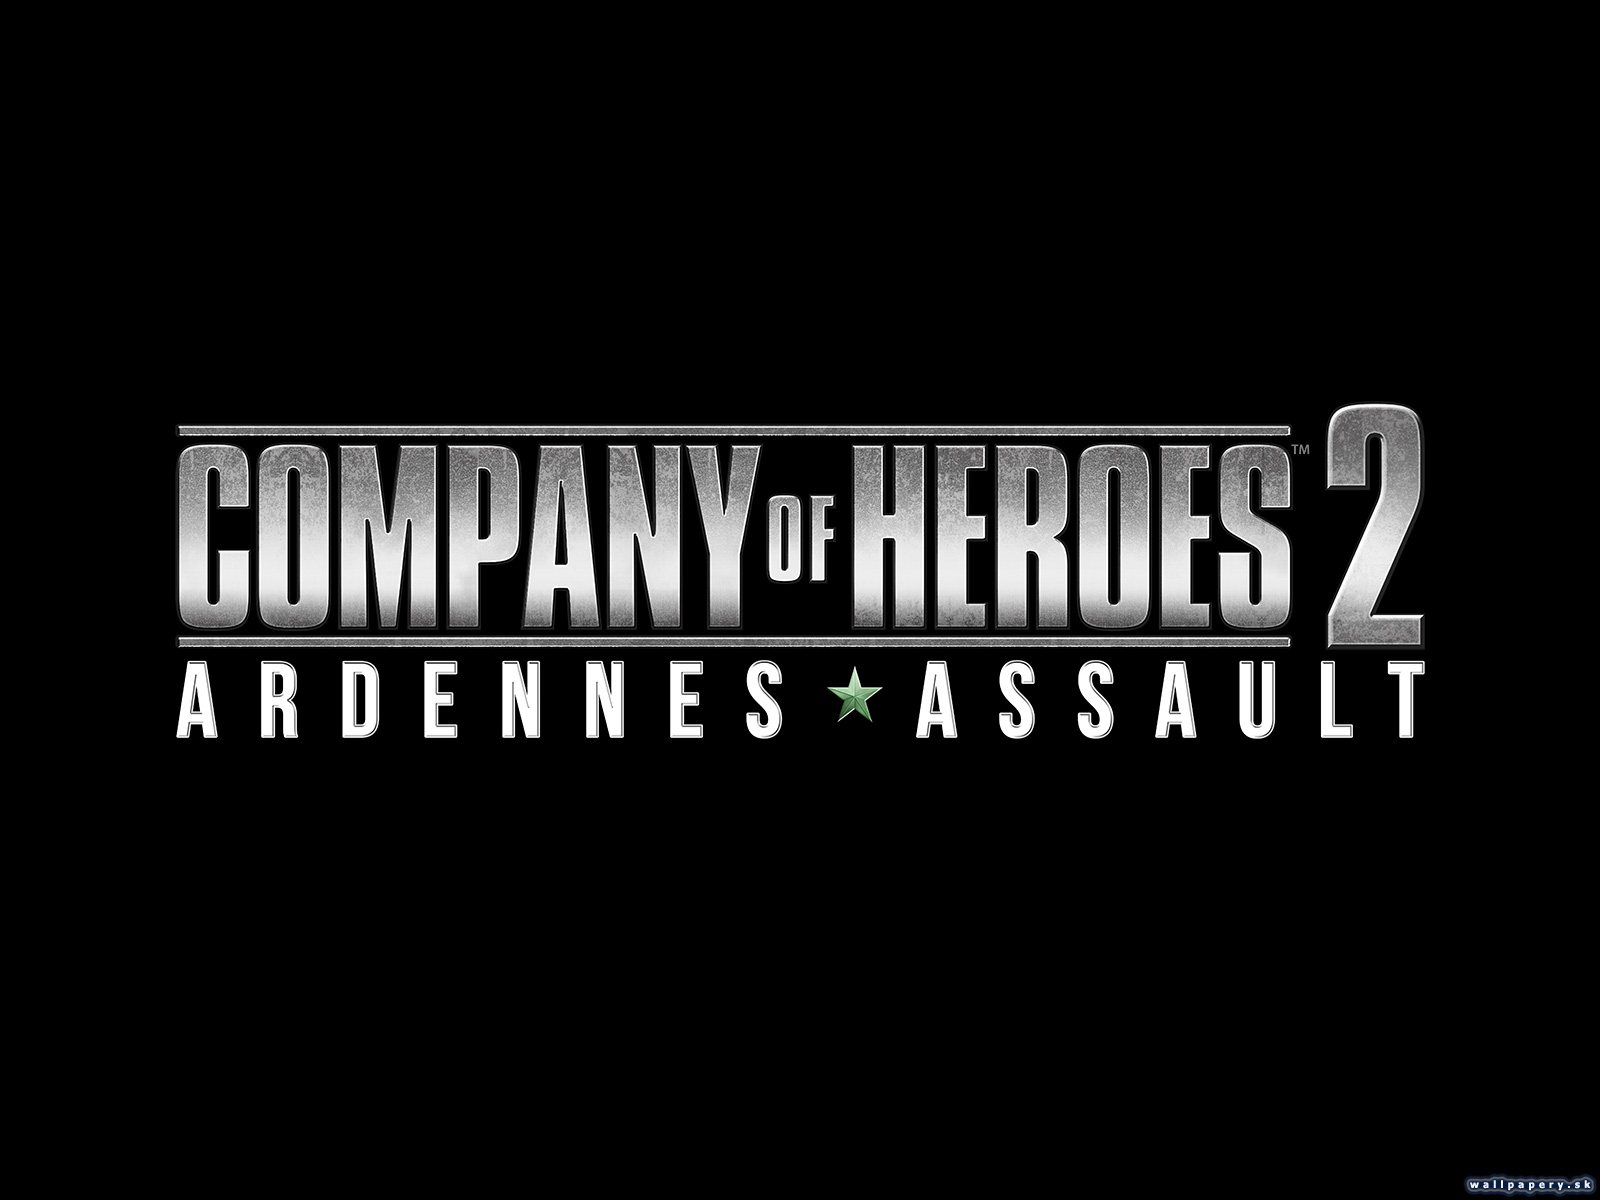 Company of Heroes 2: Ardennes Assault - wallpaper 2